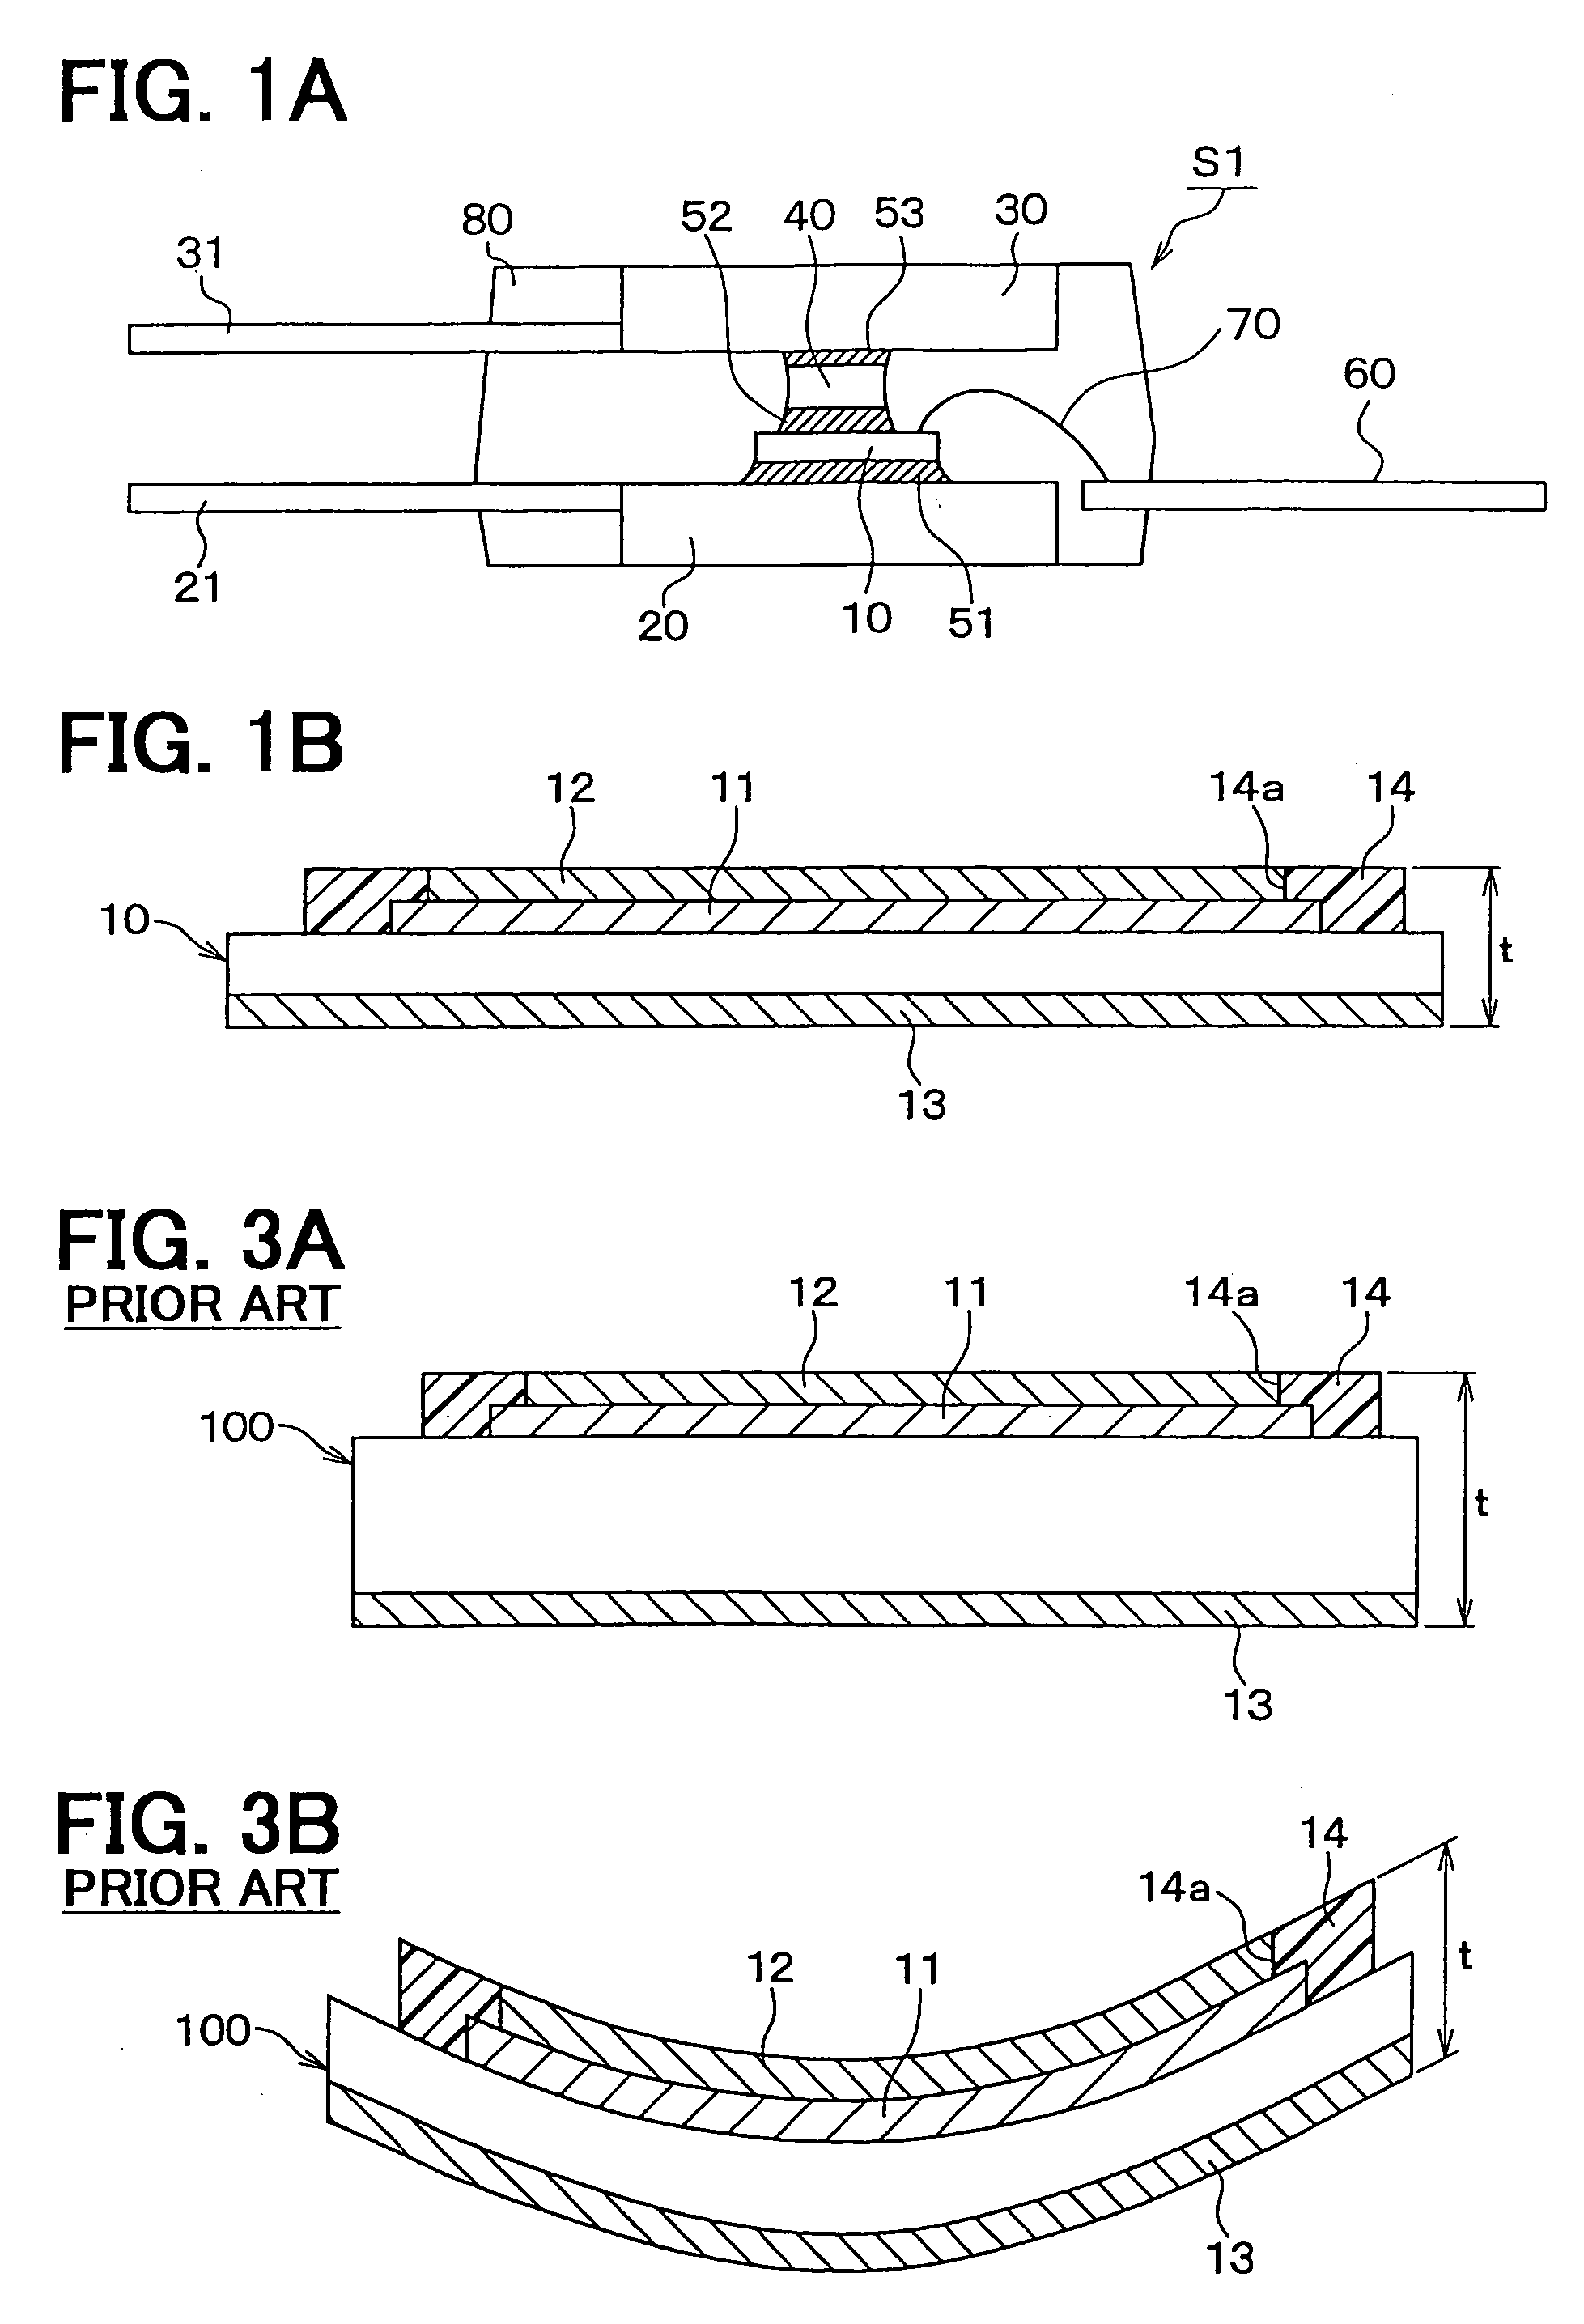 Method of manufacturing a semiconductor device including electrodes on main and reverse sides of a semiconductor chip